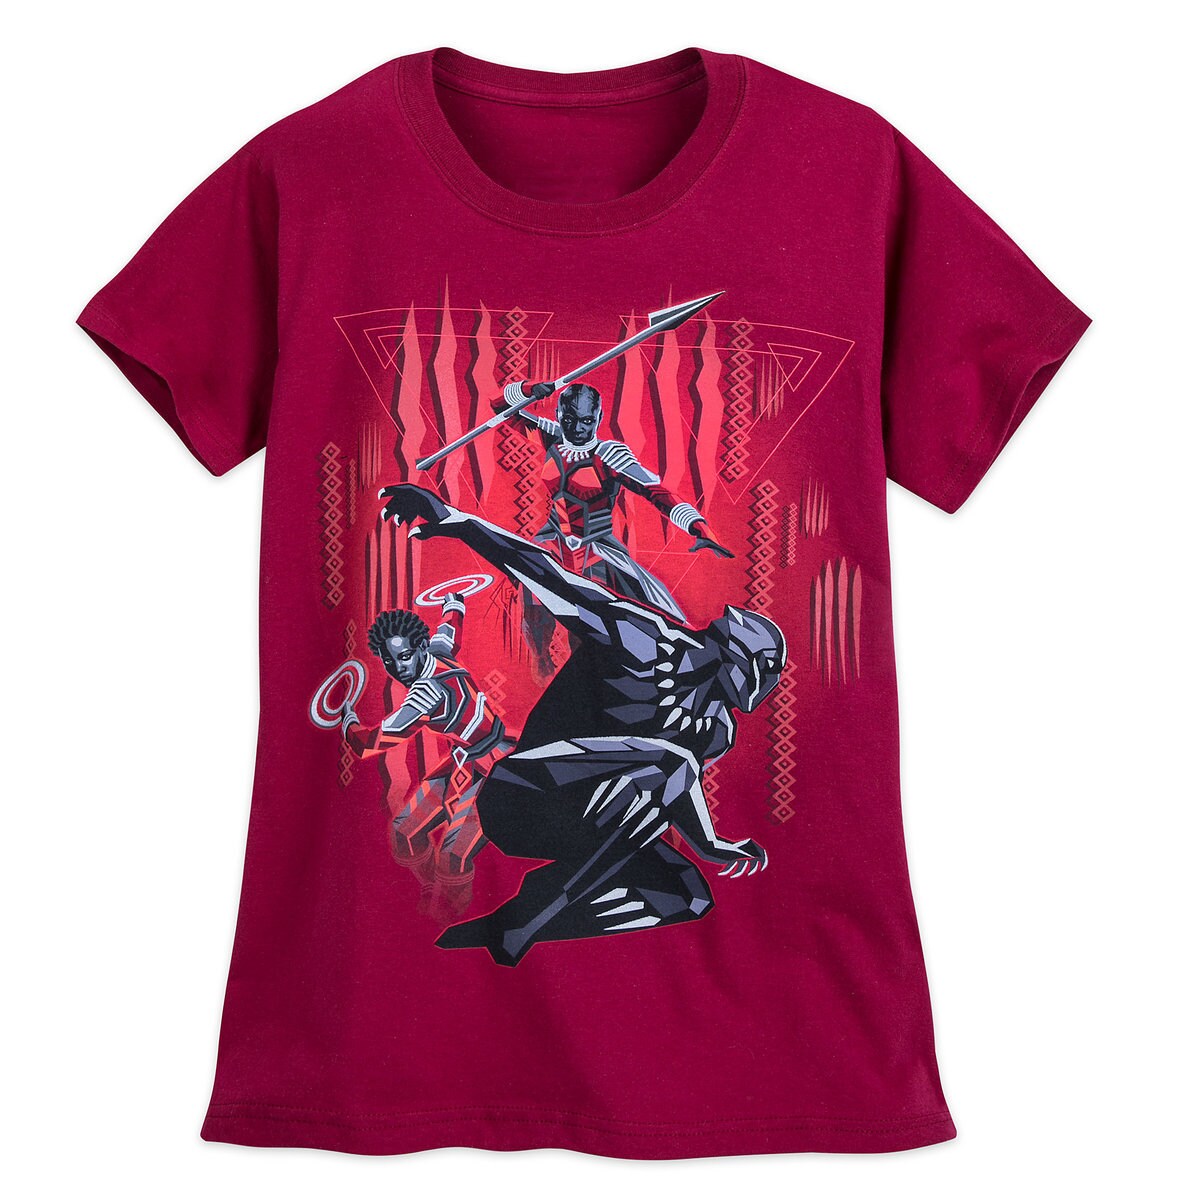 Black Panther T-Shirt for Women - Red